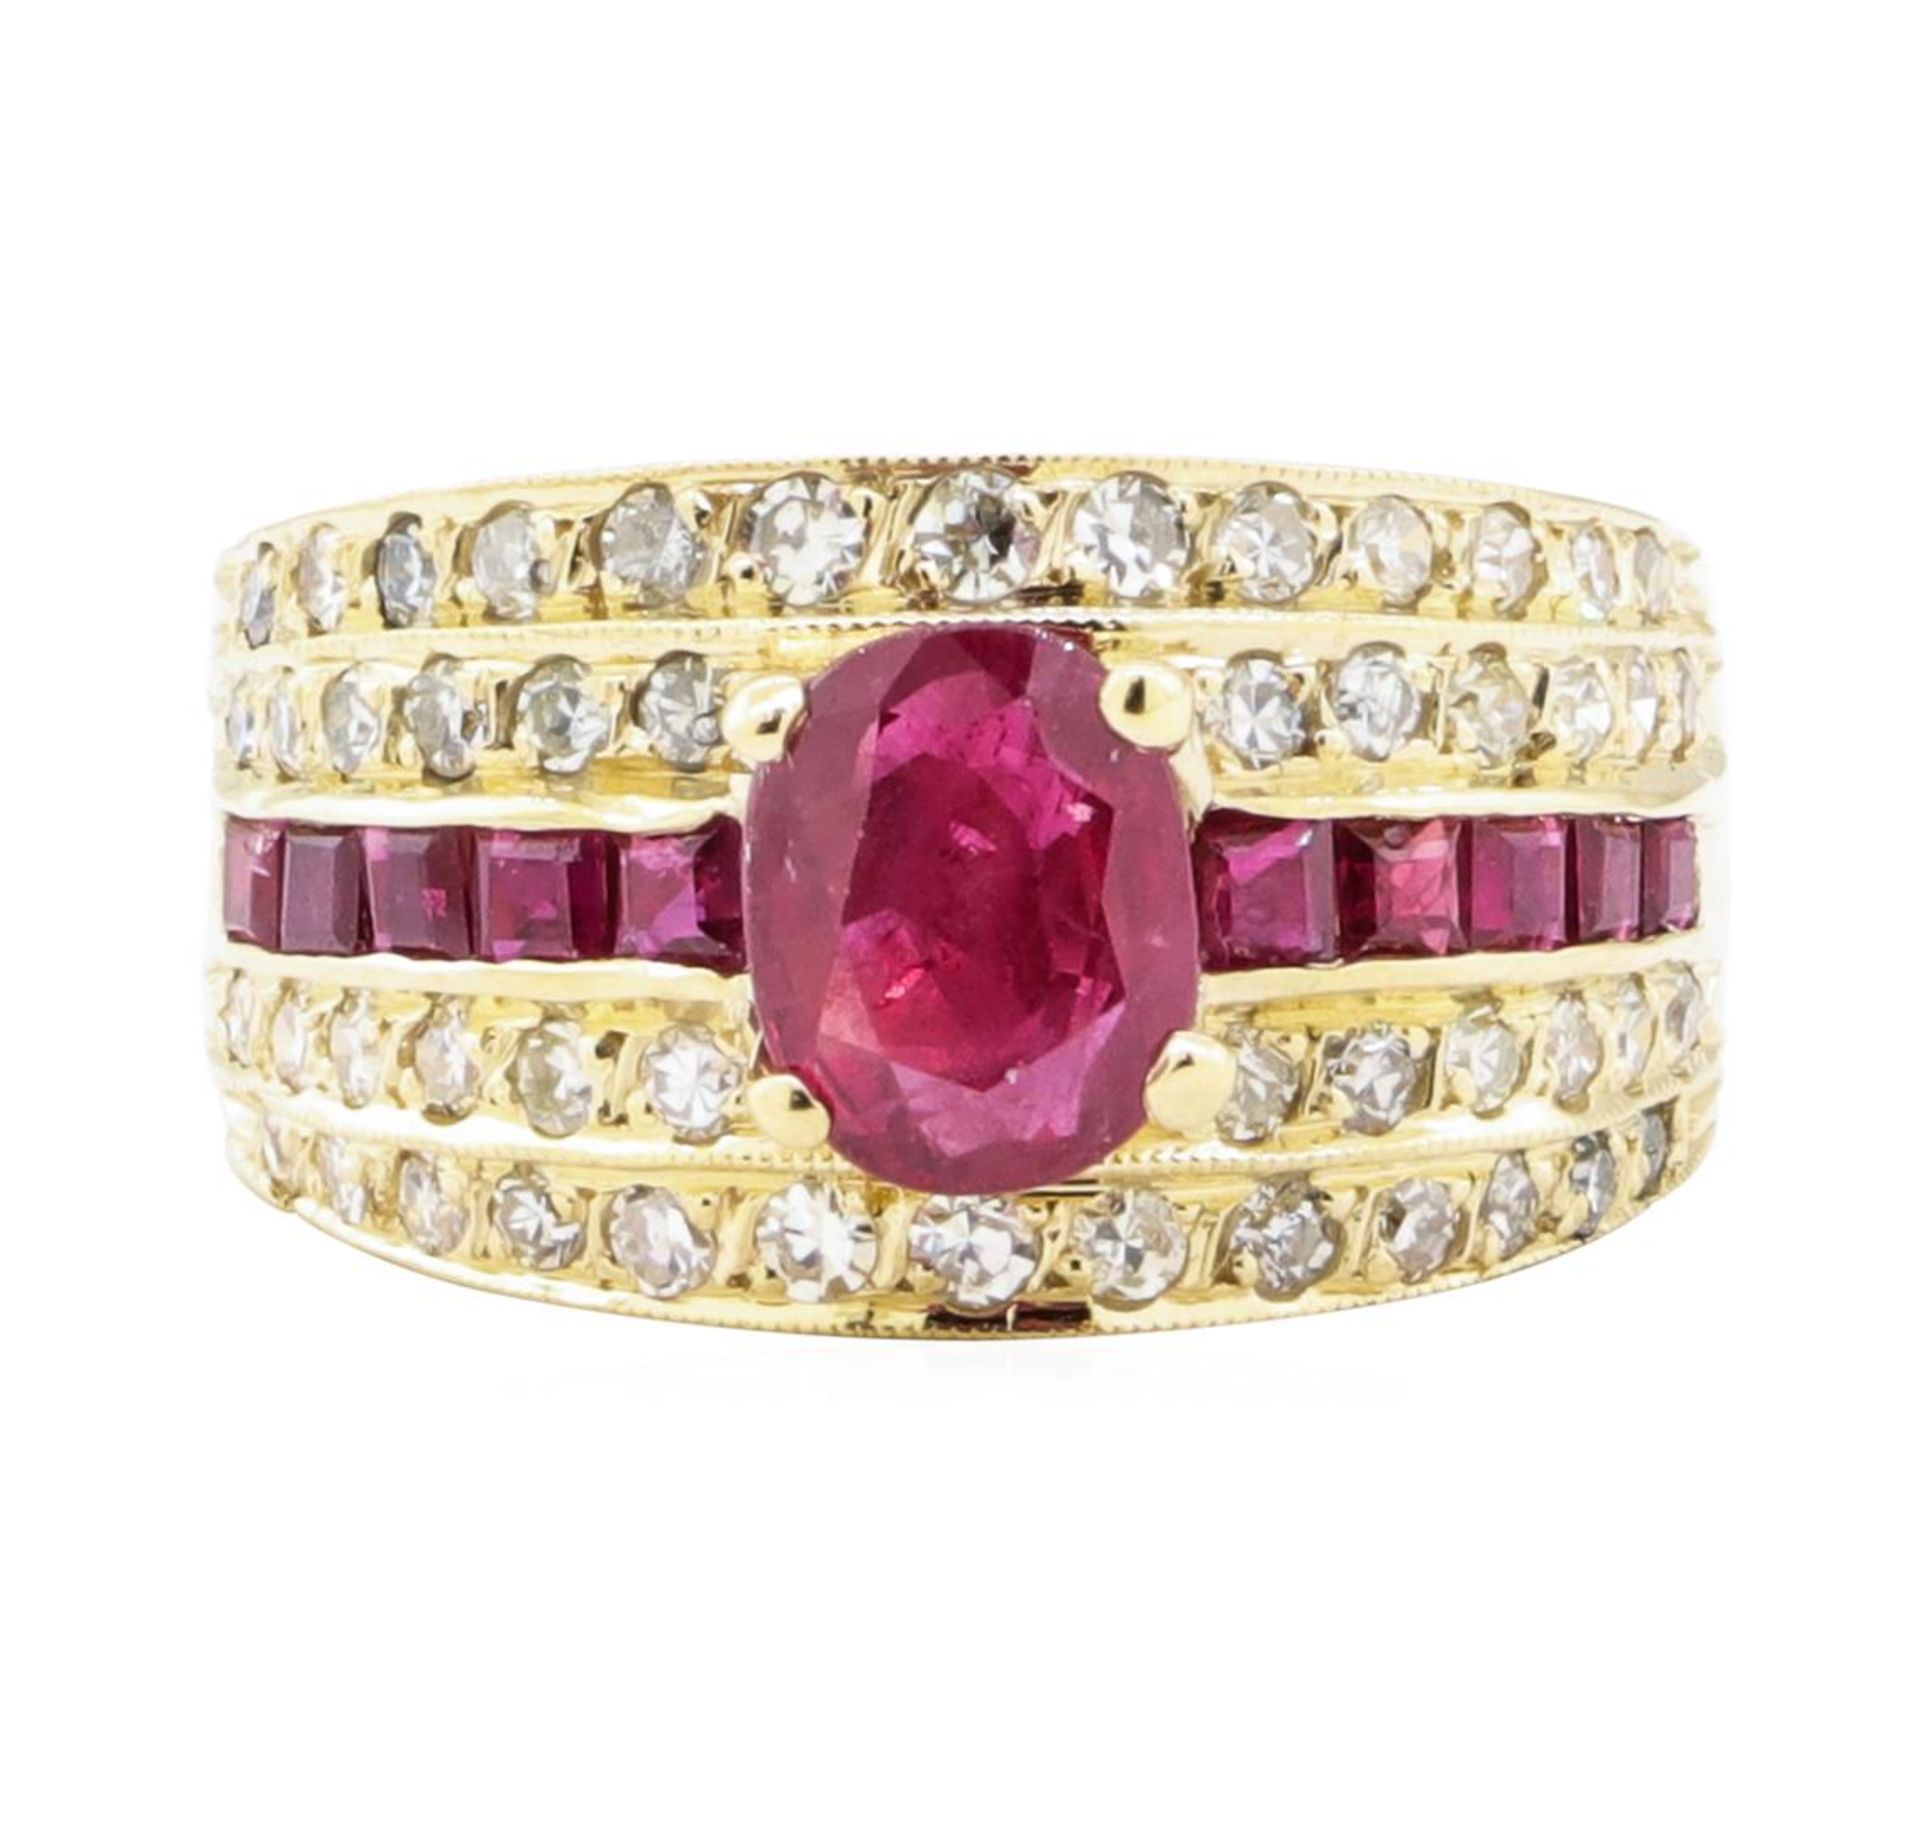 2.50 ctw Ruby and Diamond Ring - 14KT Yellow Gold - Image 2 of 5